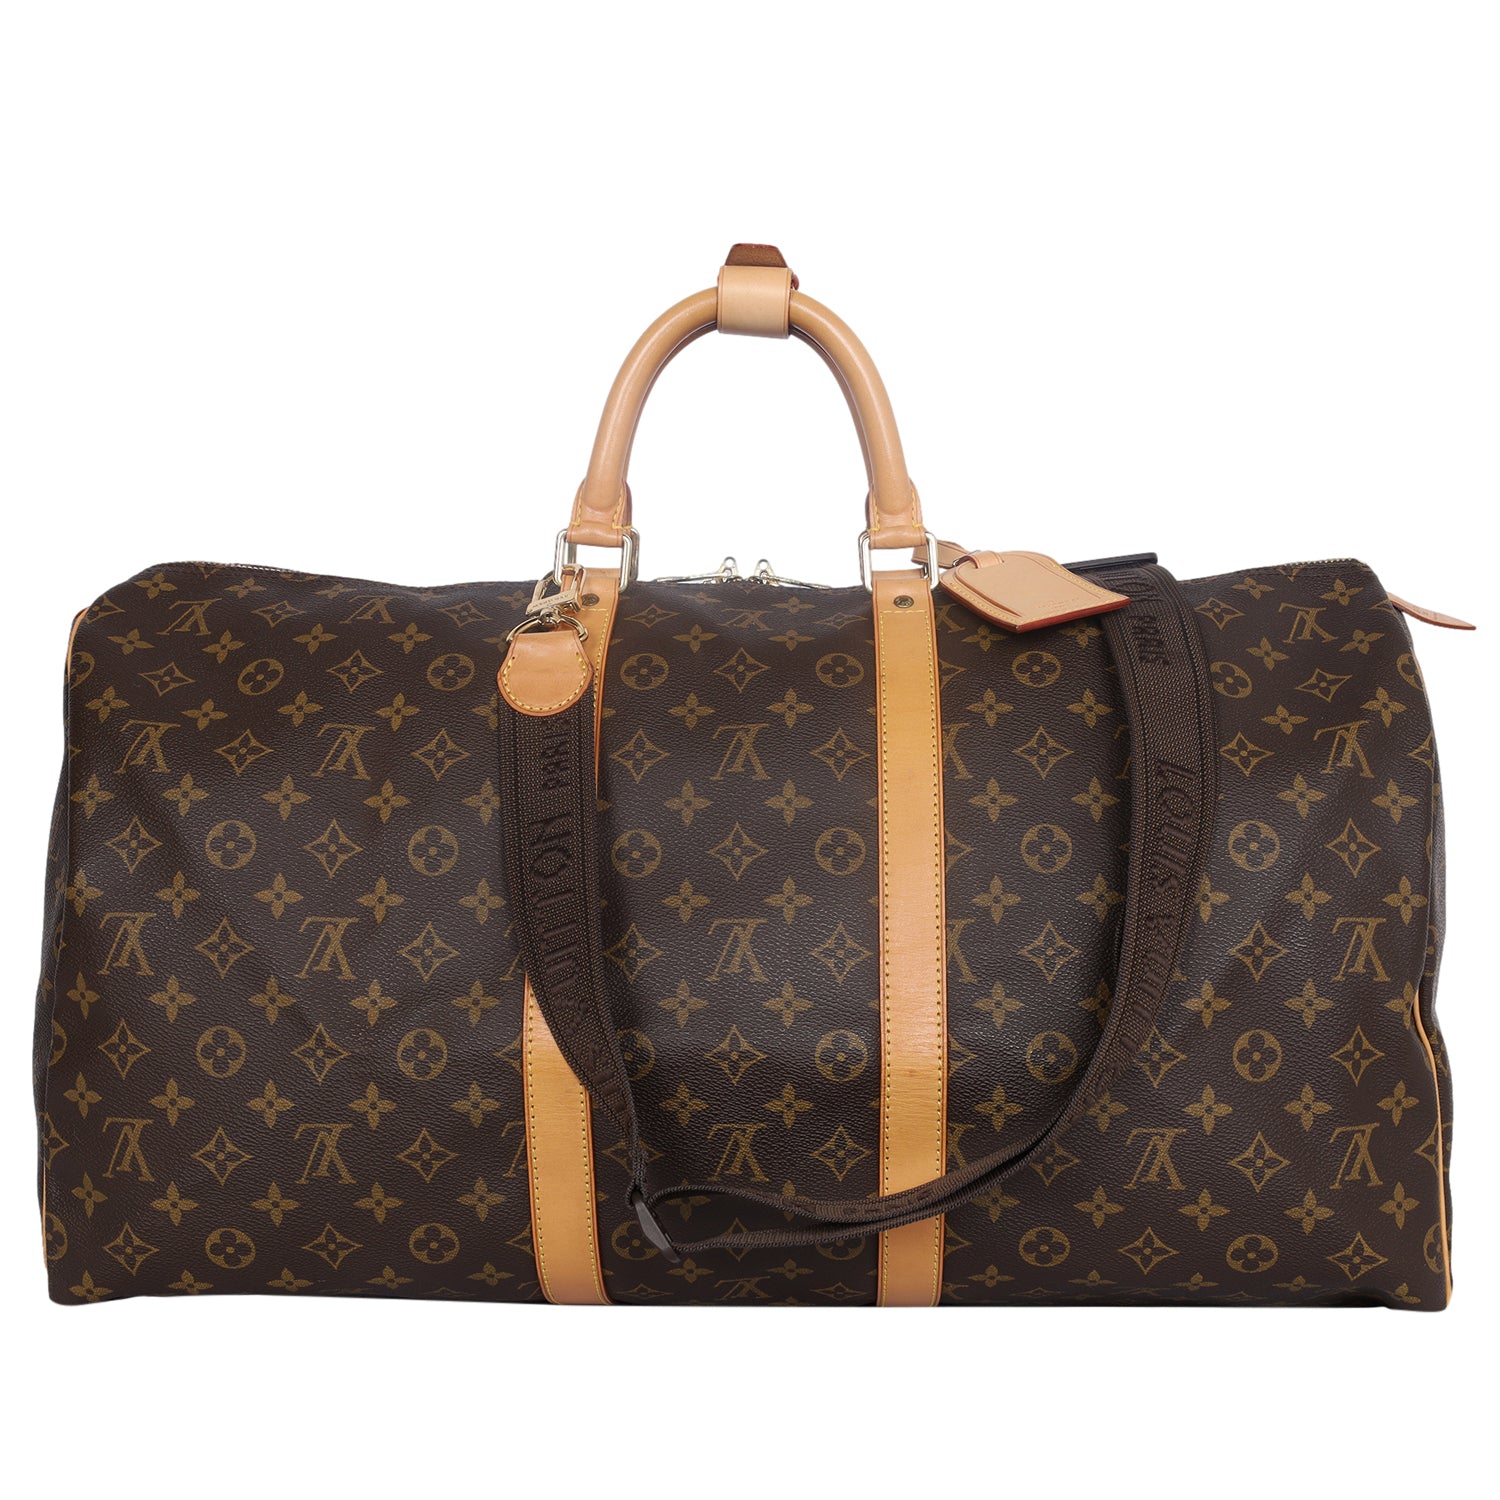 Sold x RARE LV America's Cup Keepall 55  Louis vuitton travel bags,  Americas cup, Keepall